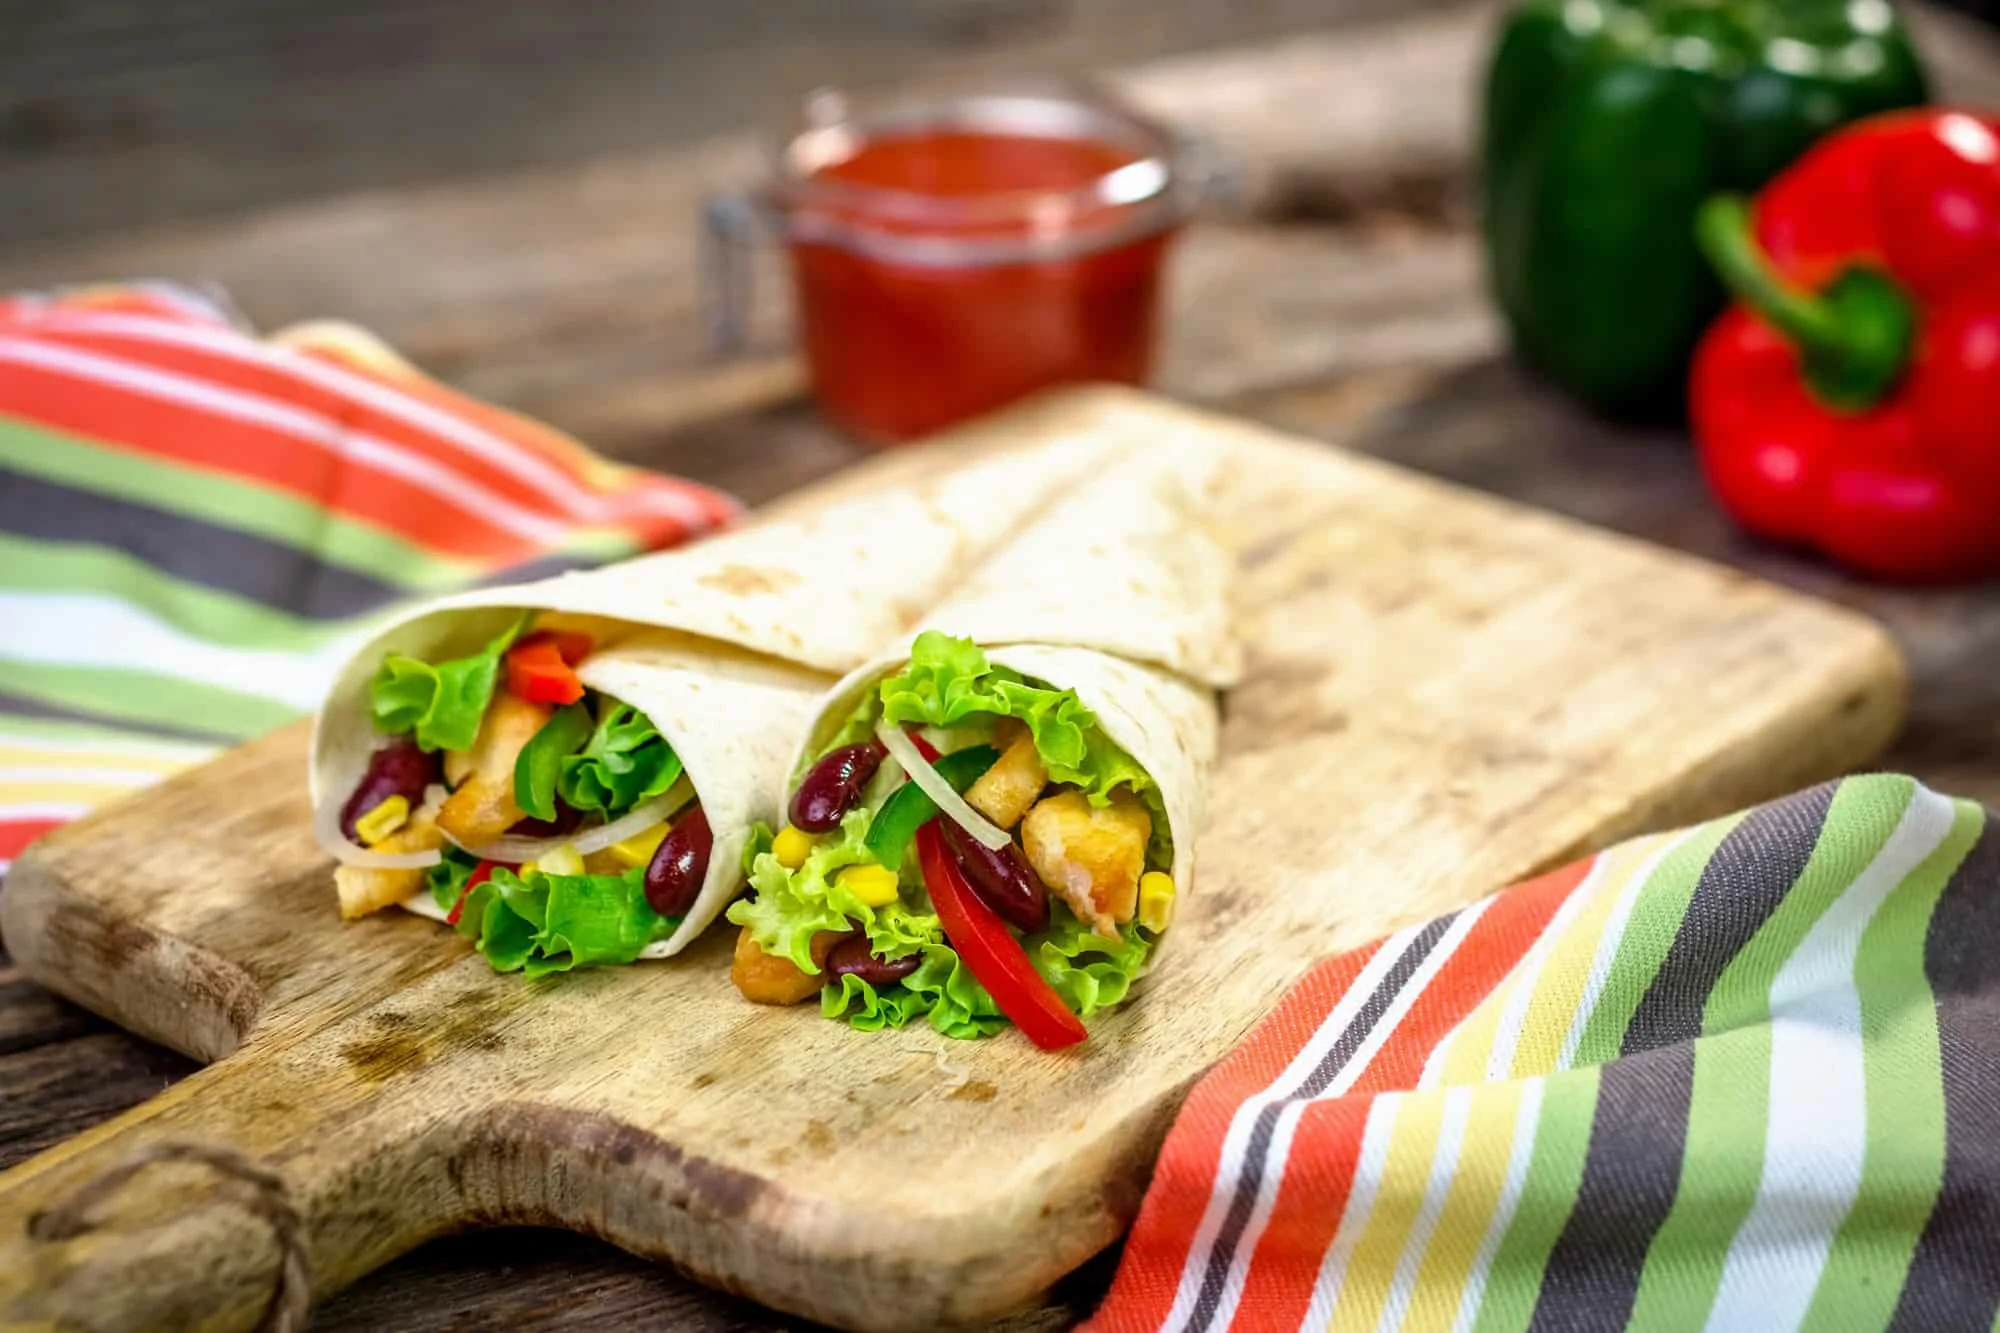 Meat and vegetables wrapped in a tortilla